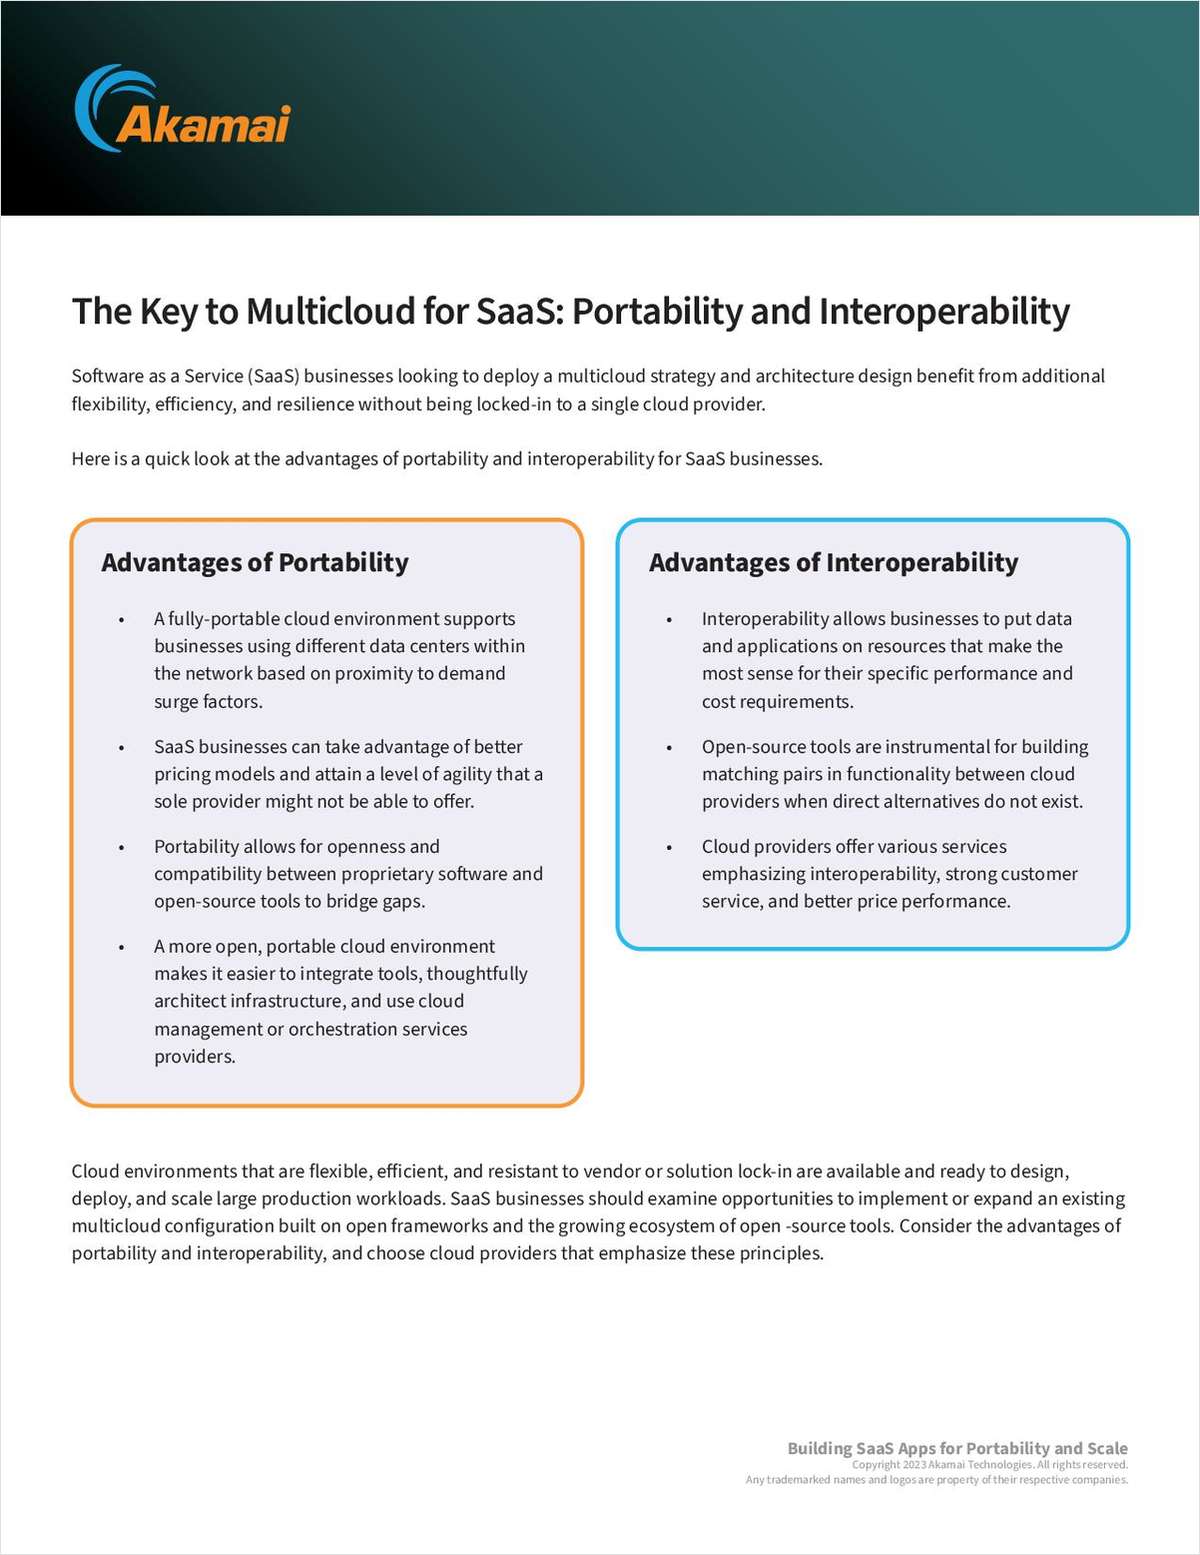 The Key to Multicloud for SaaS: Portability and Interoperability